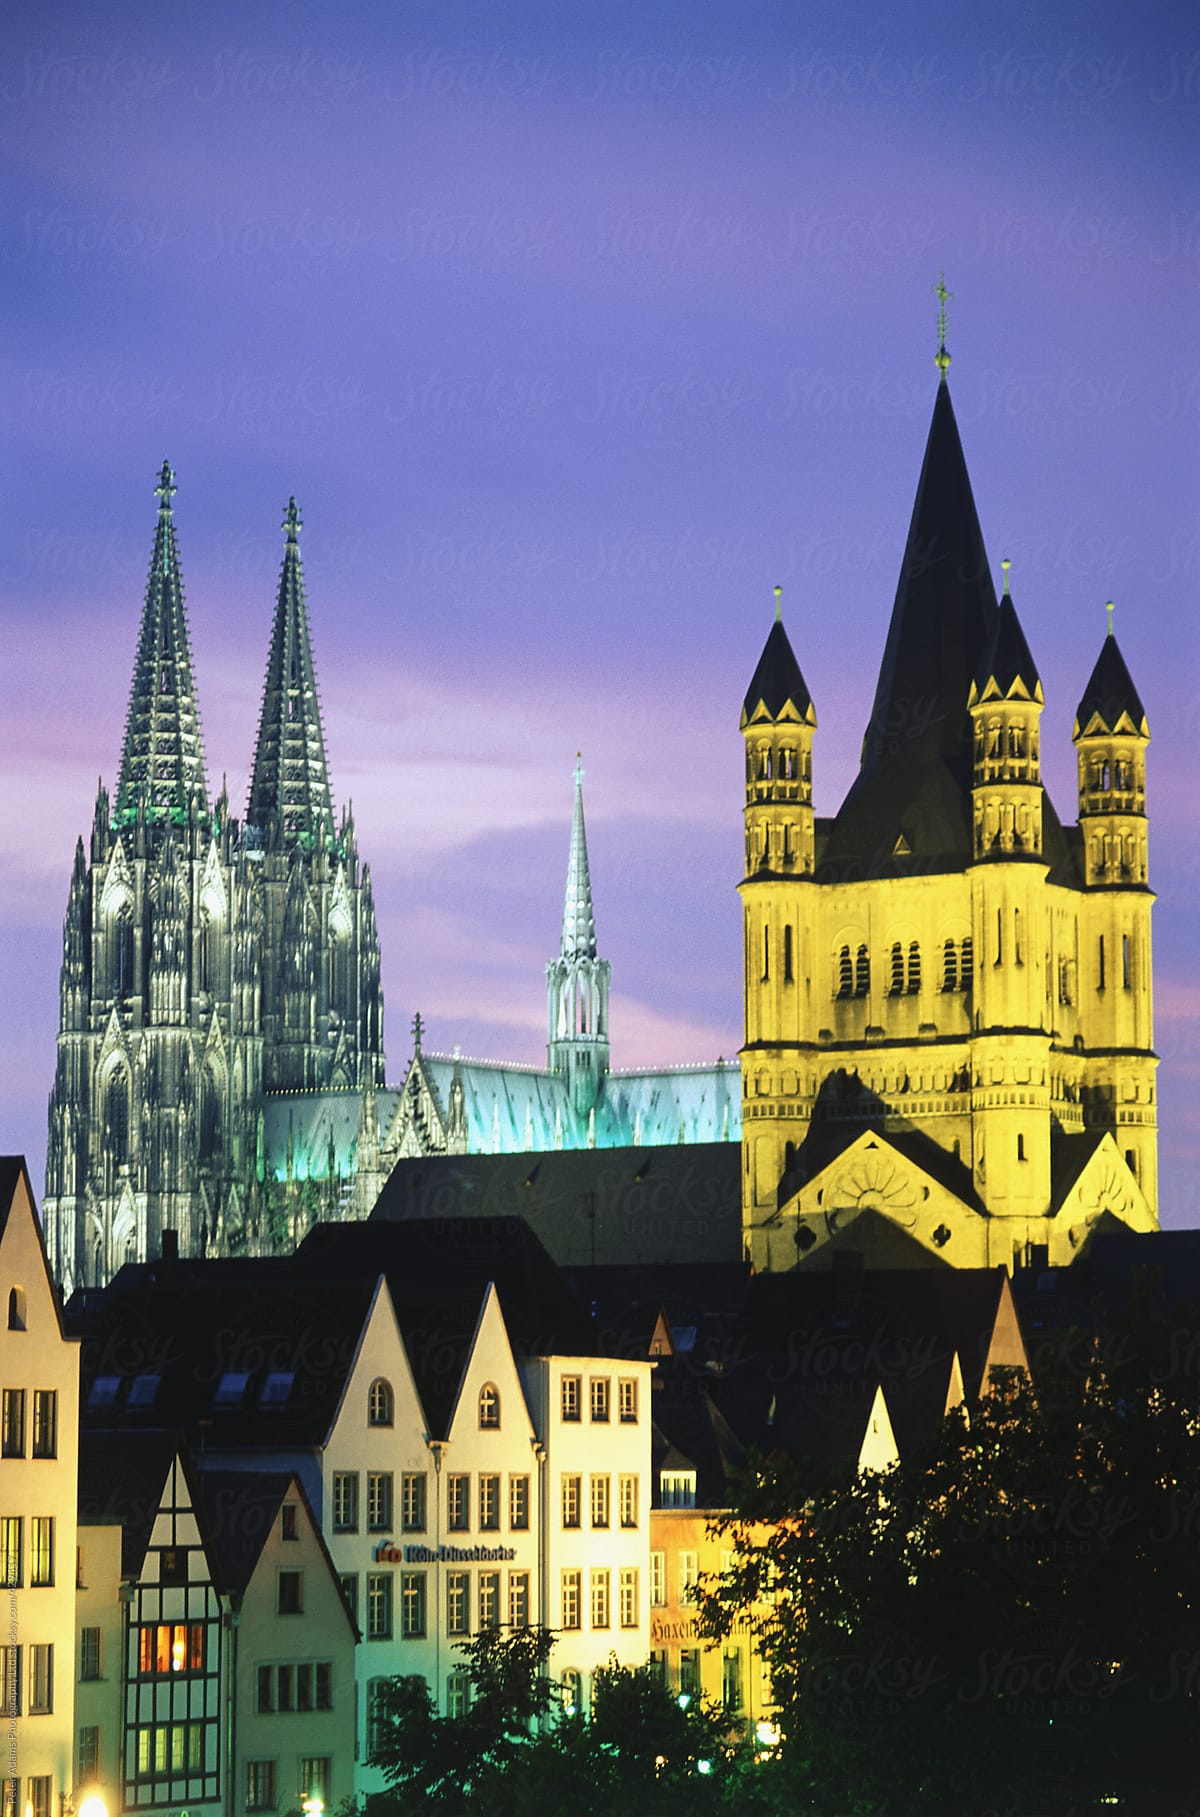 Gross St Martin and Cologne Cathedral, Cologne, Germany